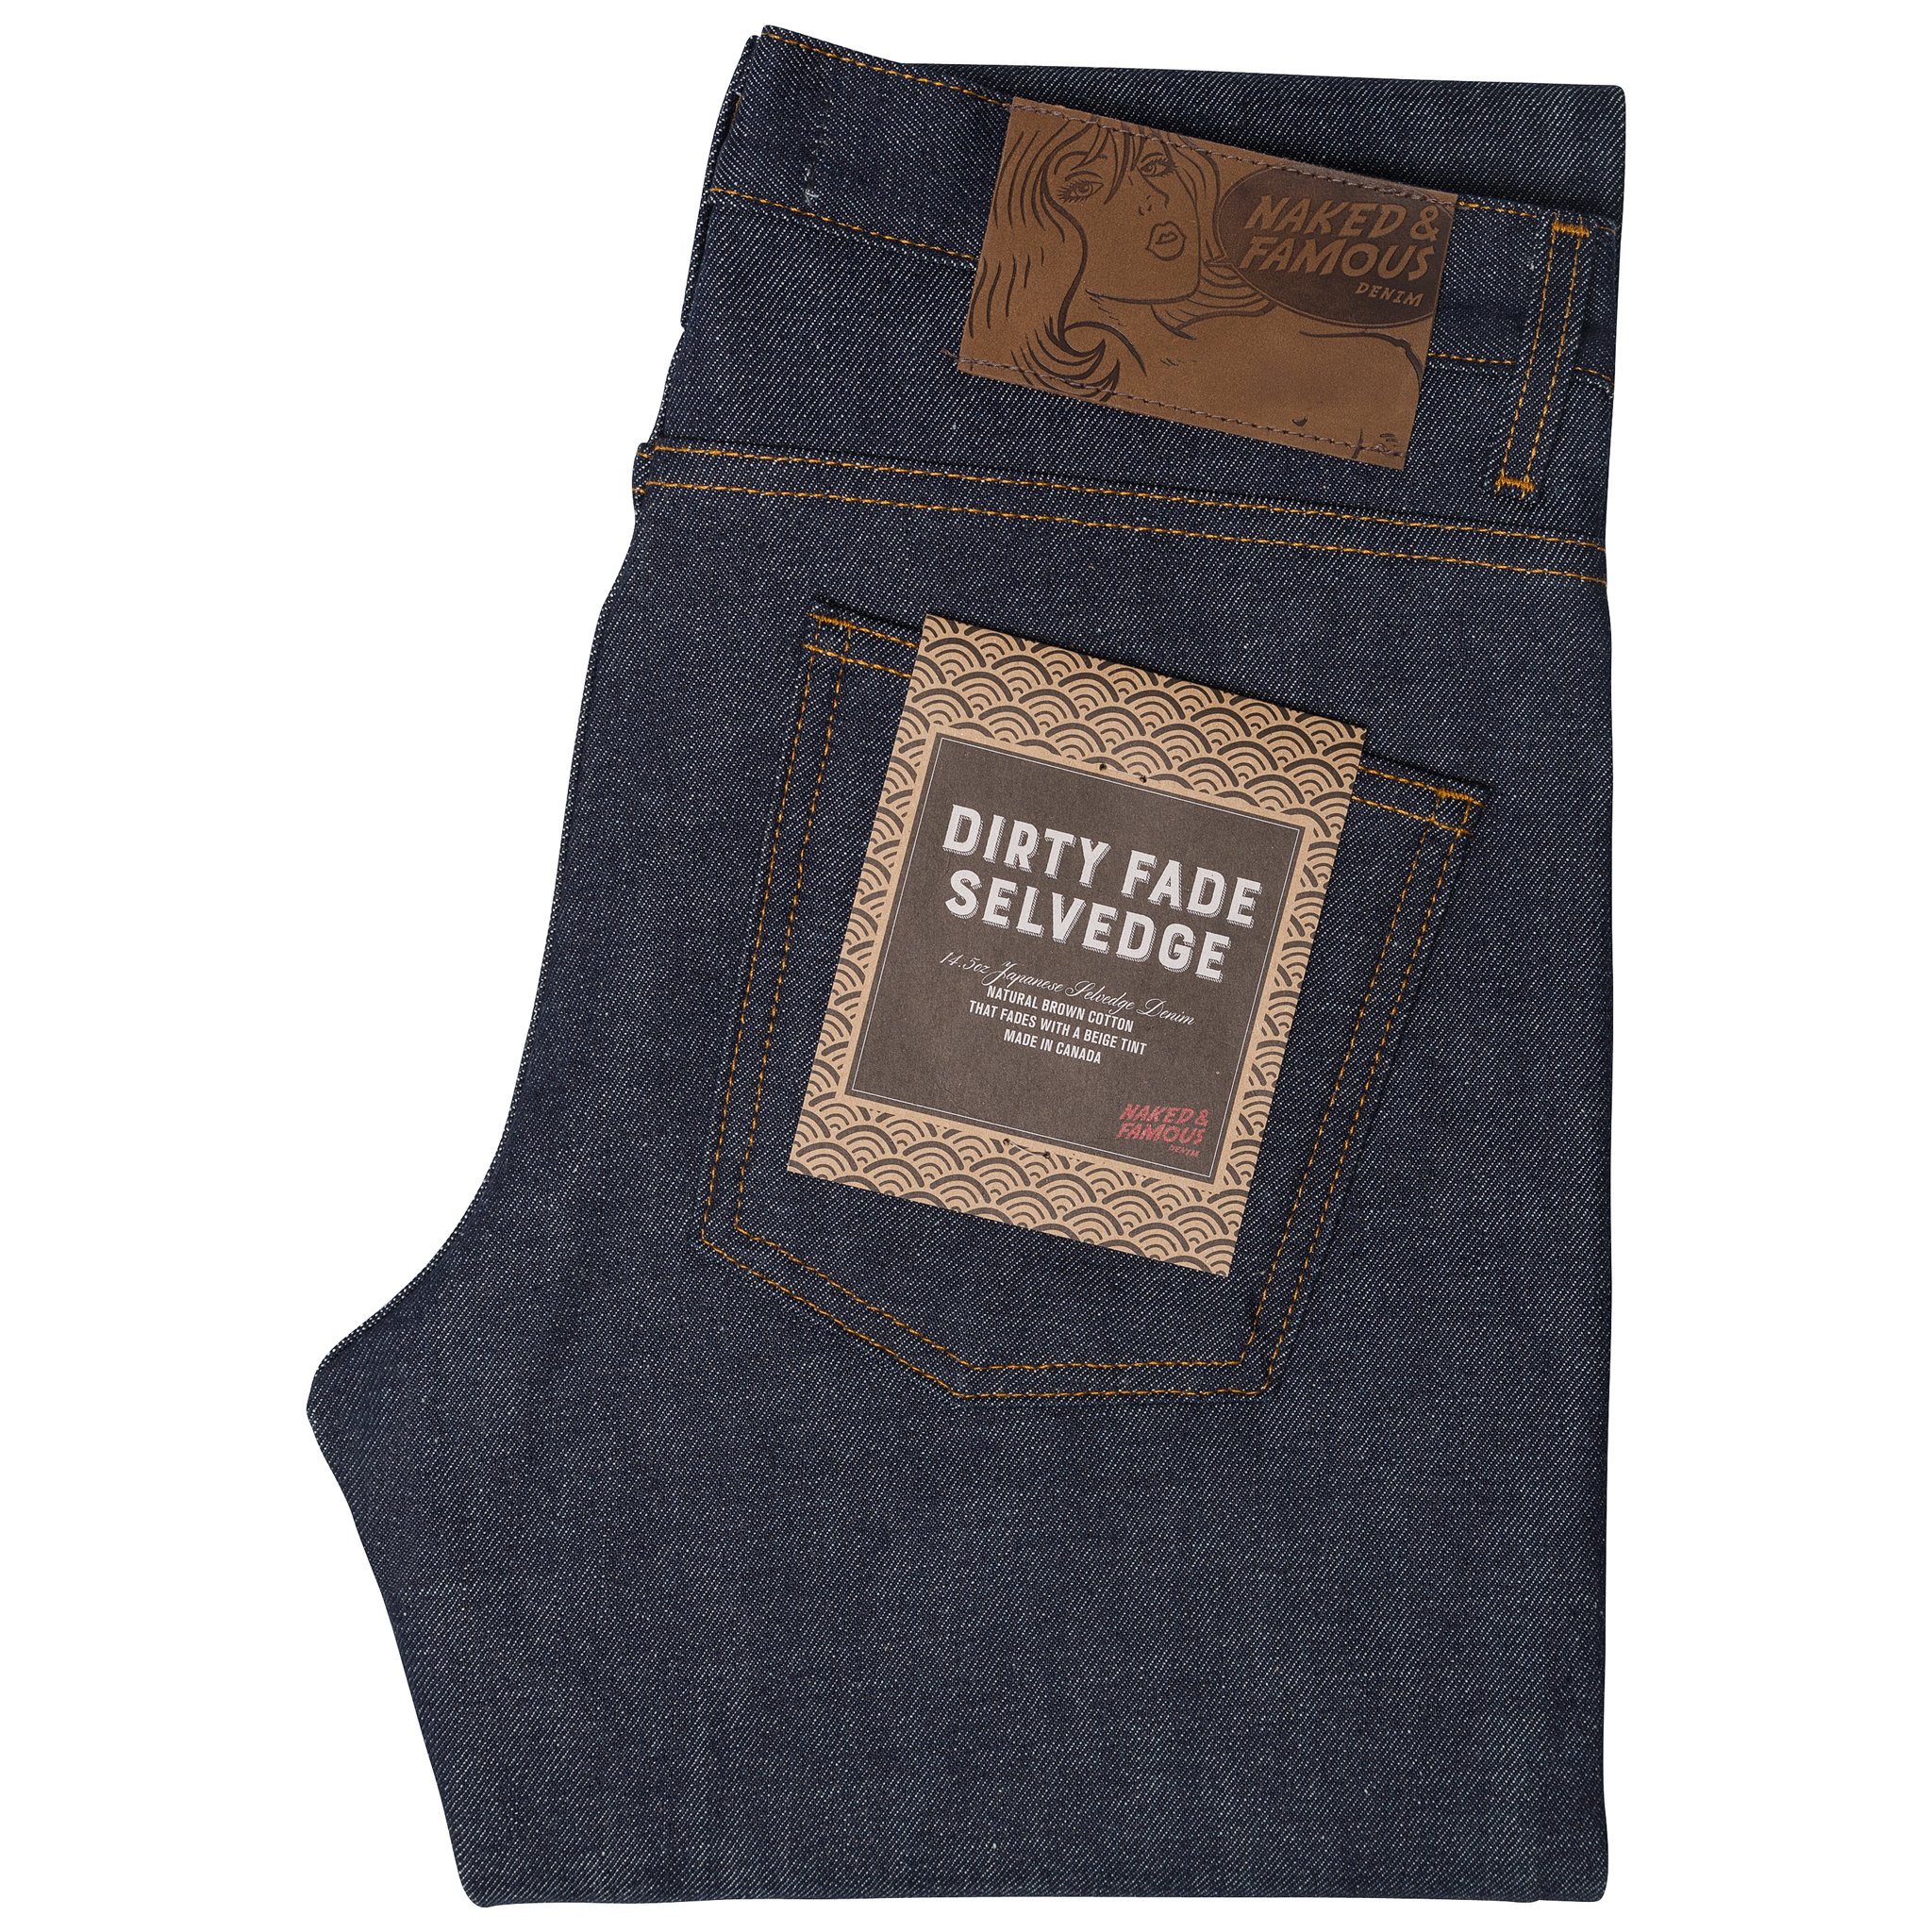 Dirty Fade Selvedge | Naked & Famous Denim